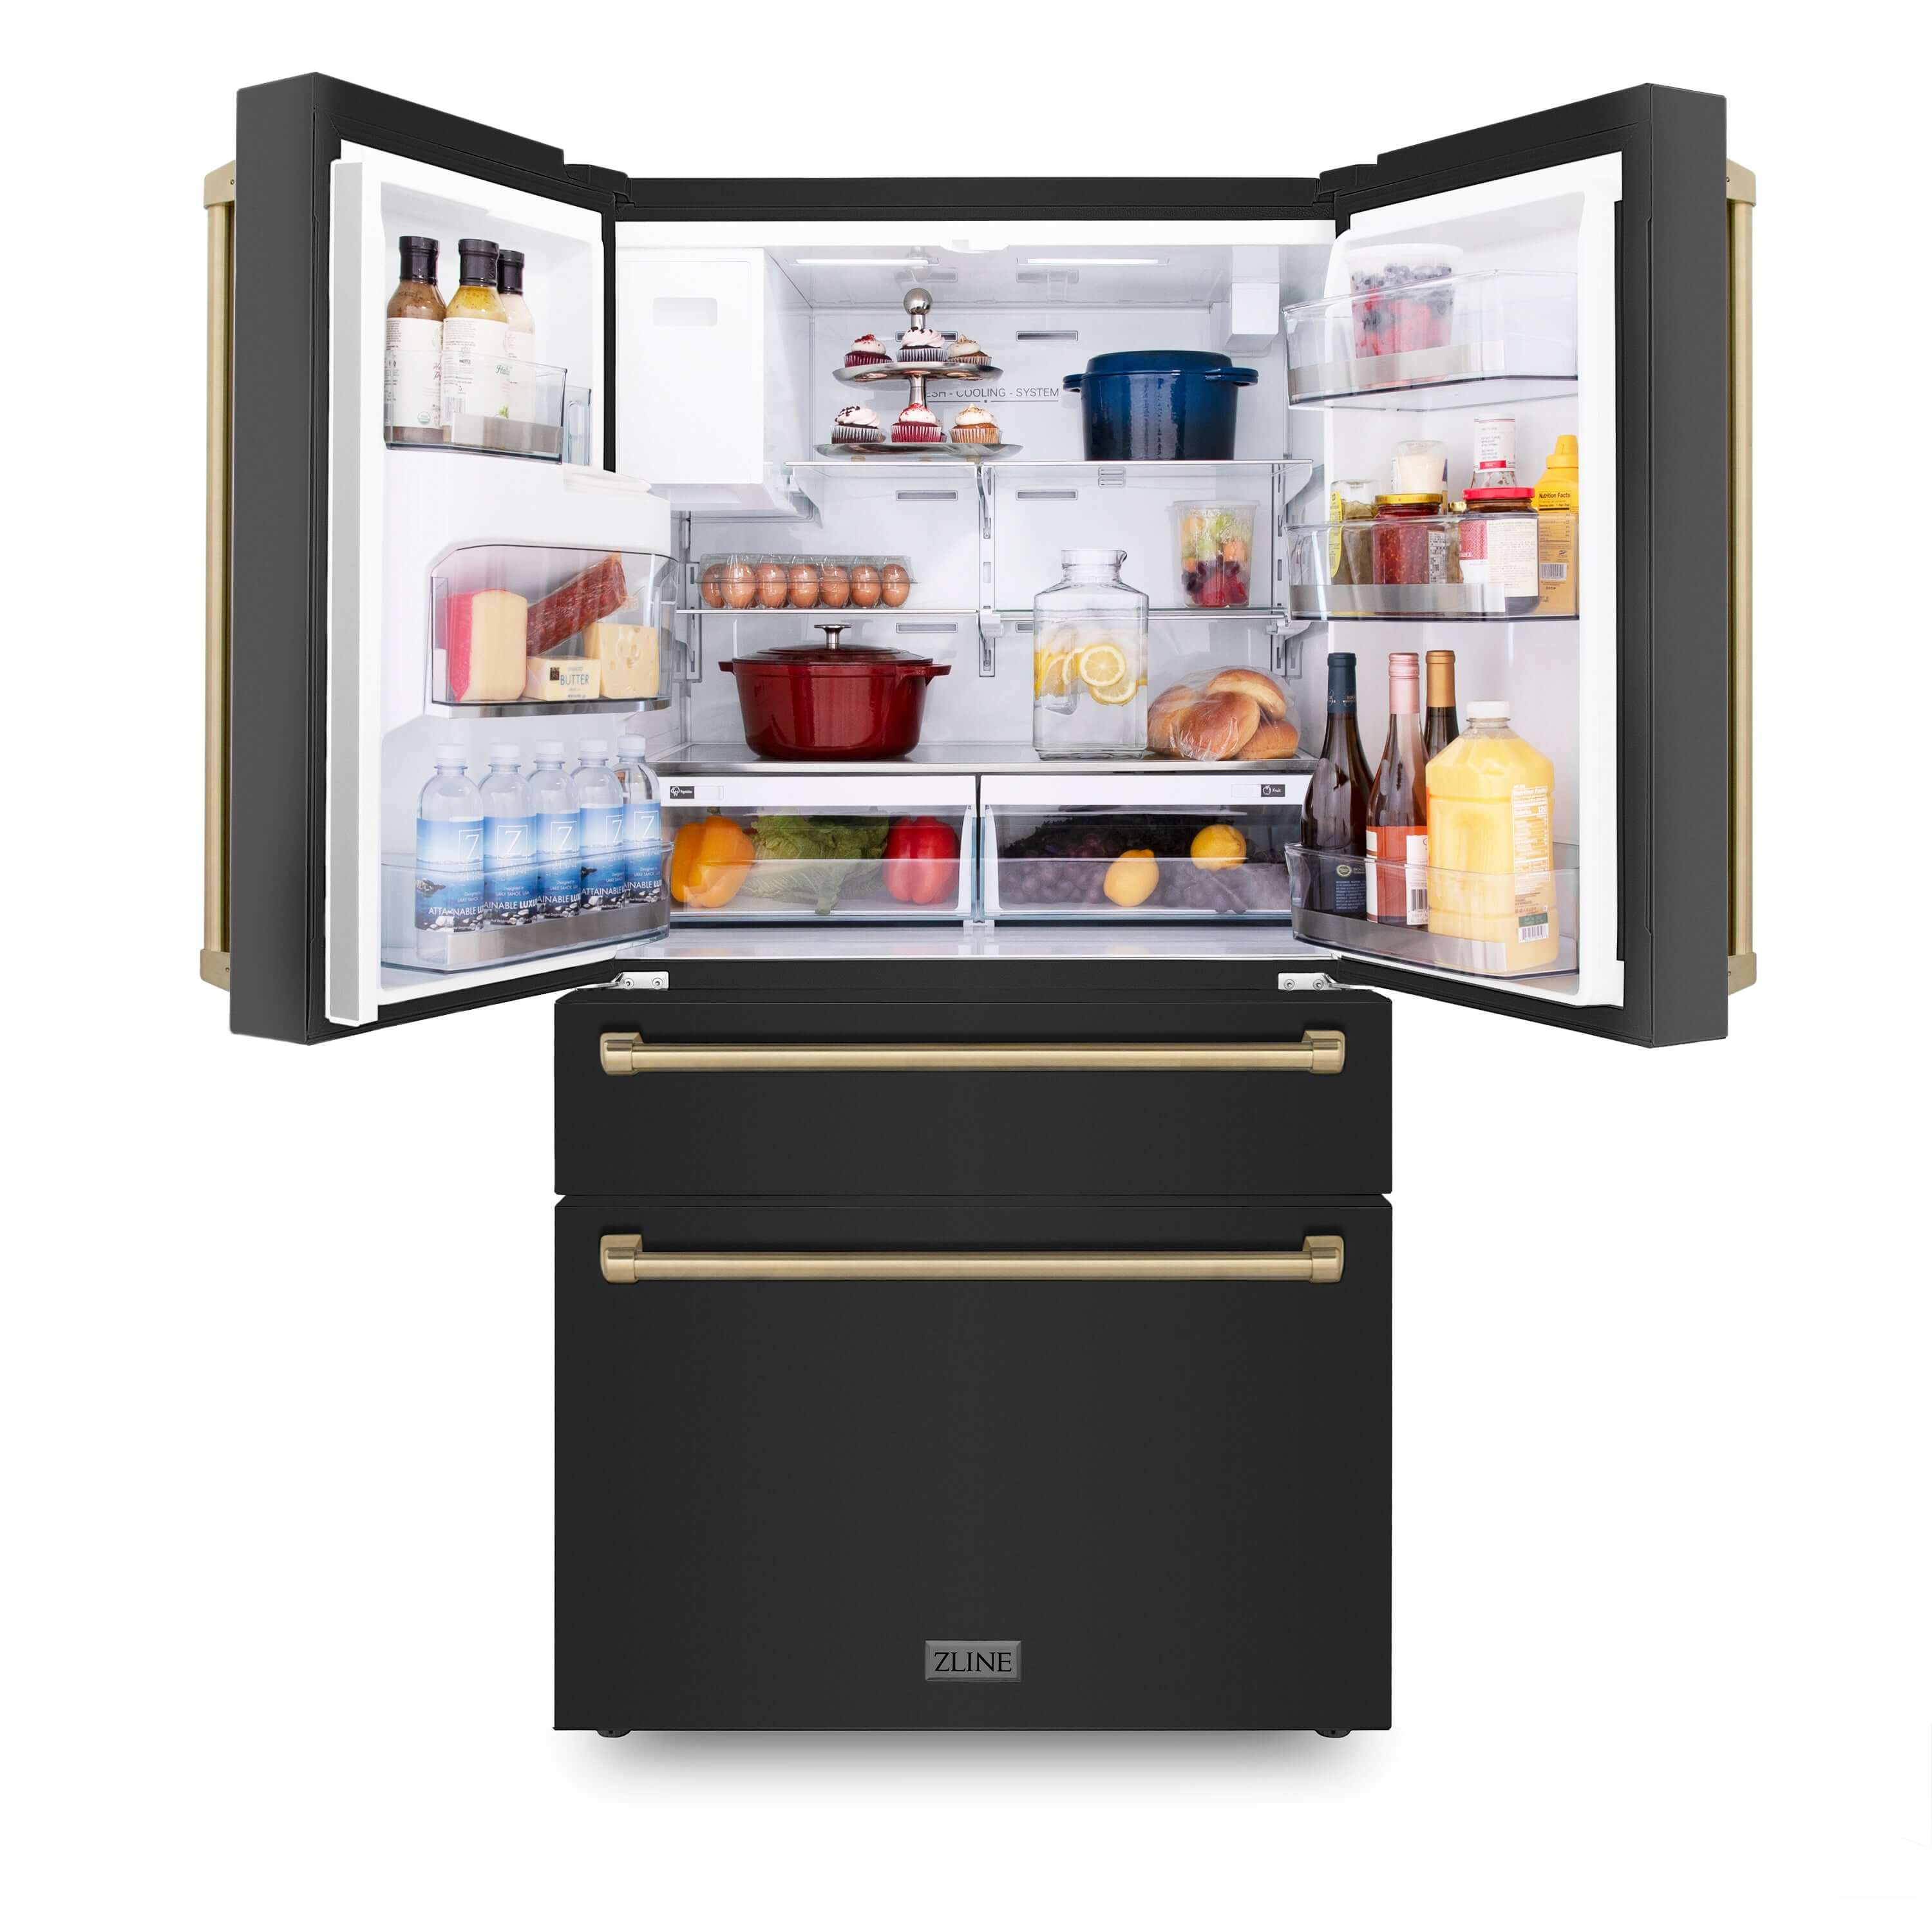 ZLINE Autograph Edition 36 in. 21.6 cu. ft Freestanding French Door Refrigerator with Water and Ice Dispenser in Fingerprint Resistant Black Stainless Steel with Champagne Bronze Accents (RFMZ-W-36-BS-CB) front, open with food on adjustable shelving inside refrigeration compartment.